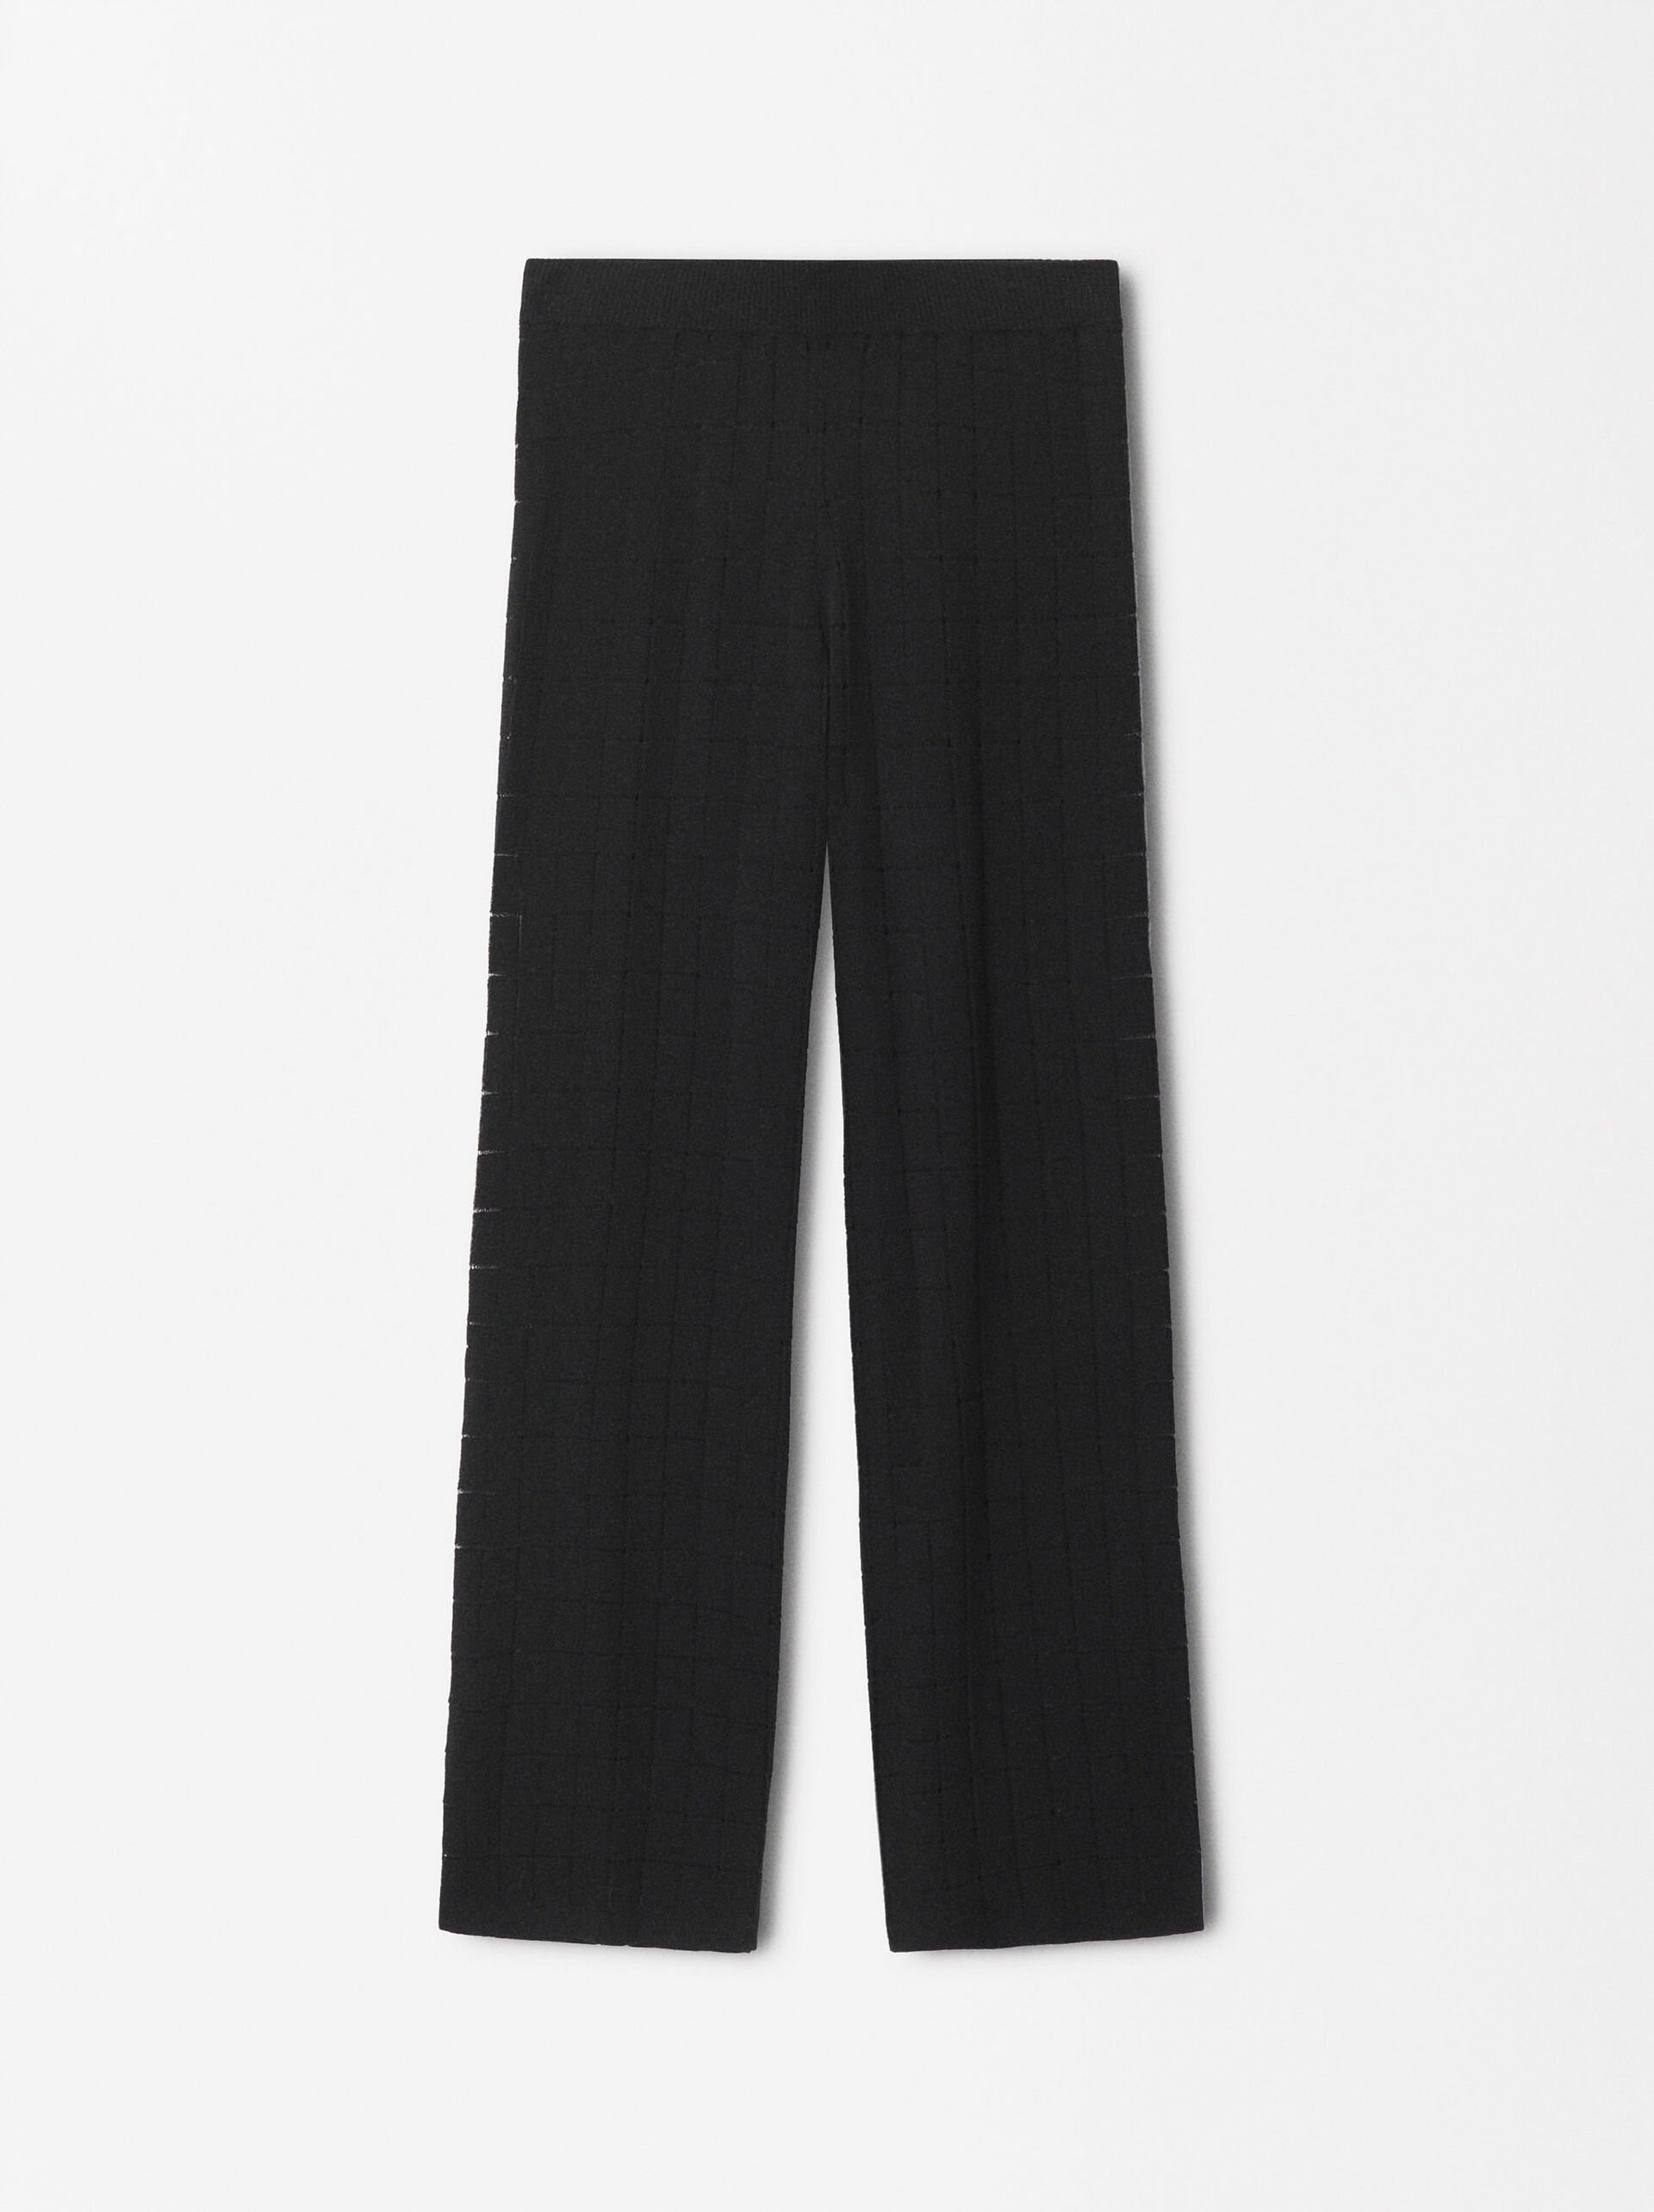 Pointelle Knit Trousers image number 1.0